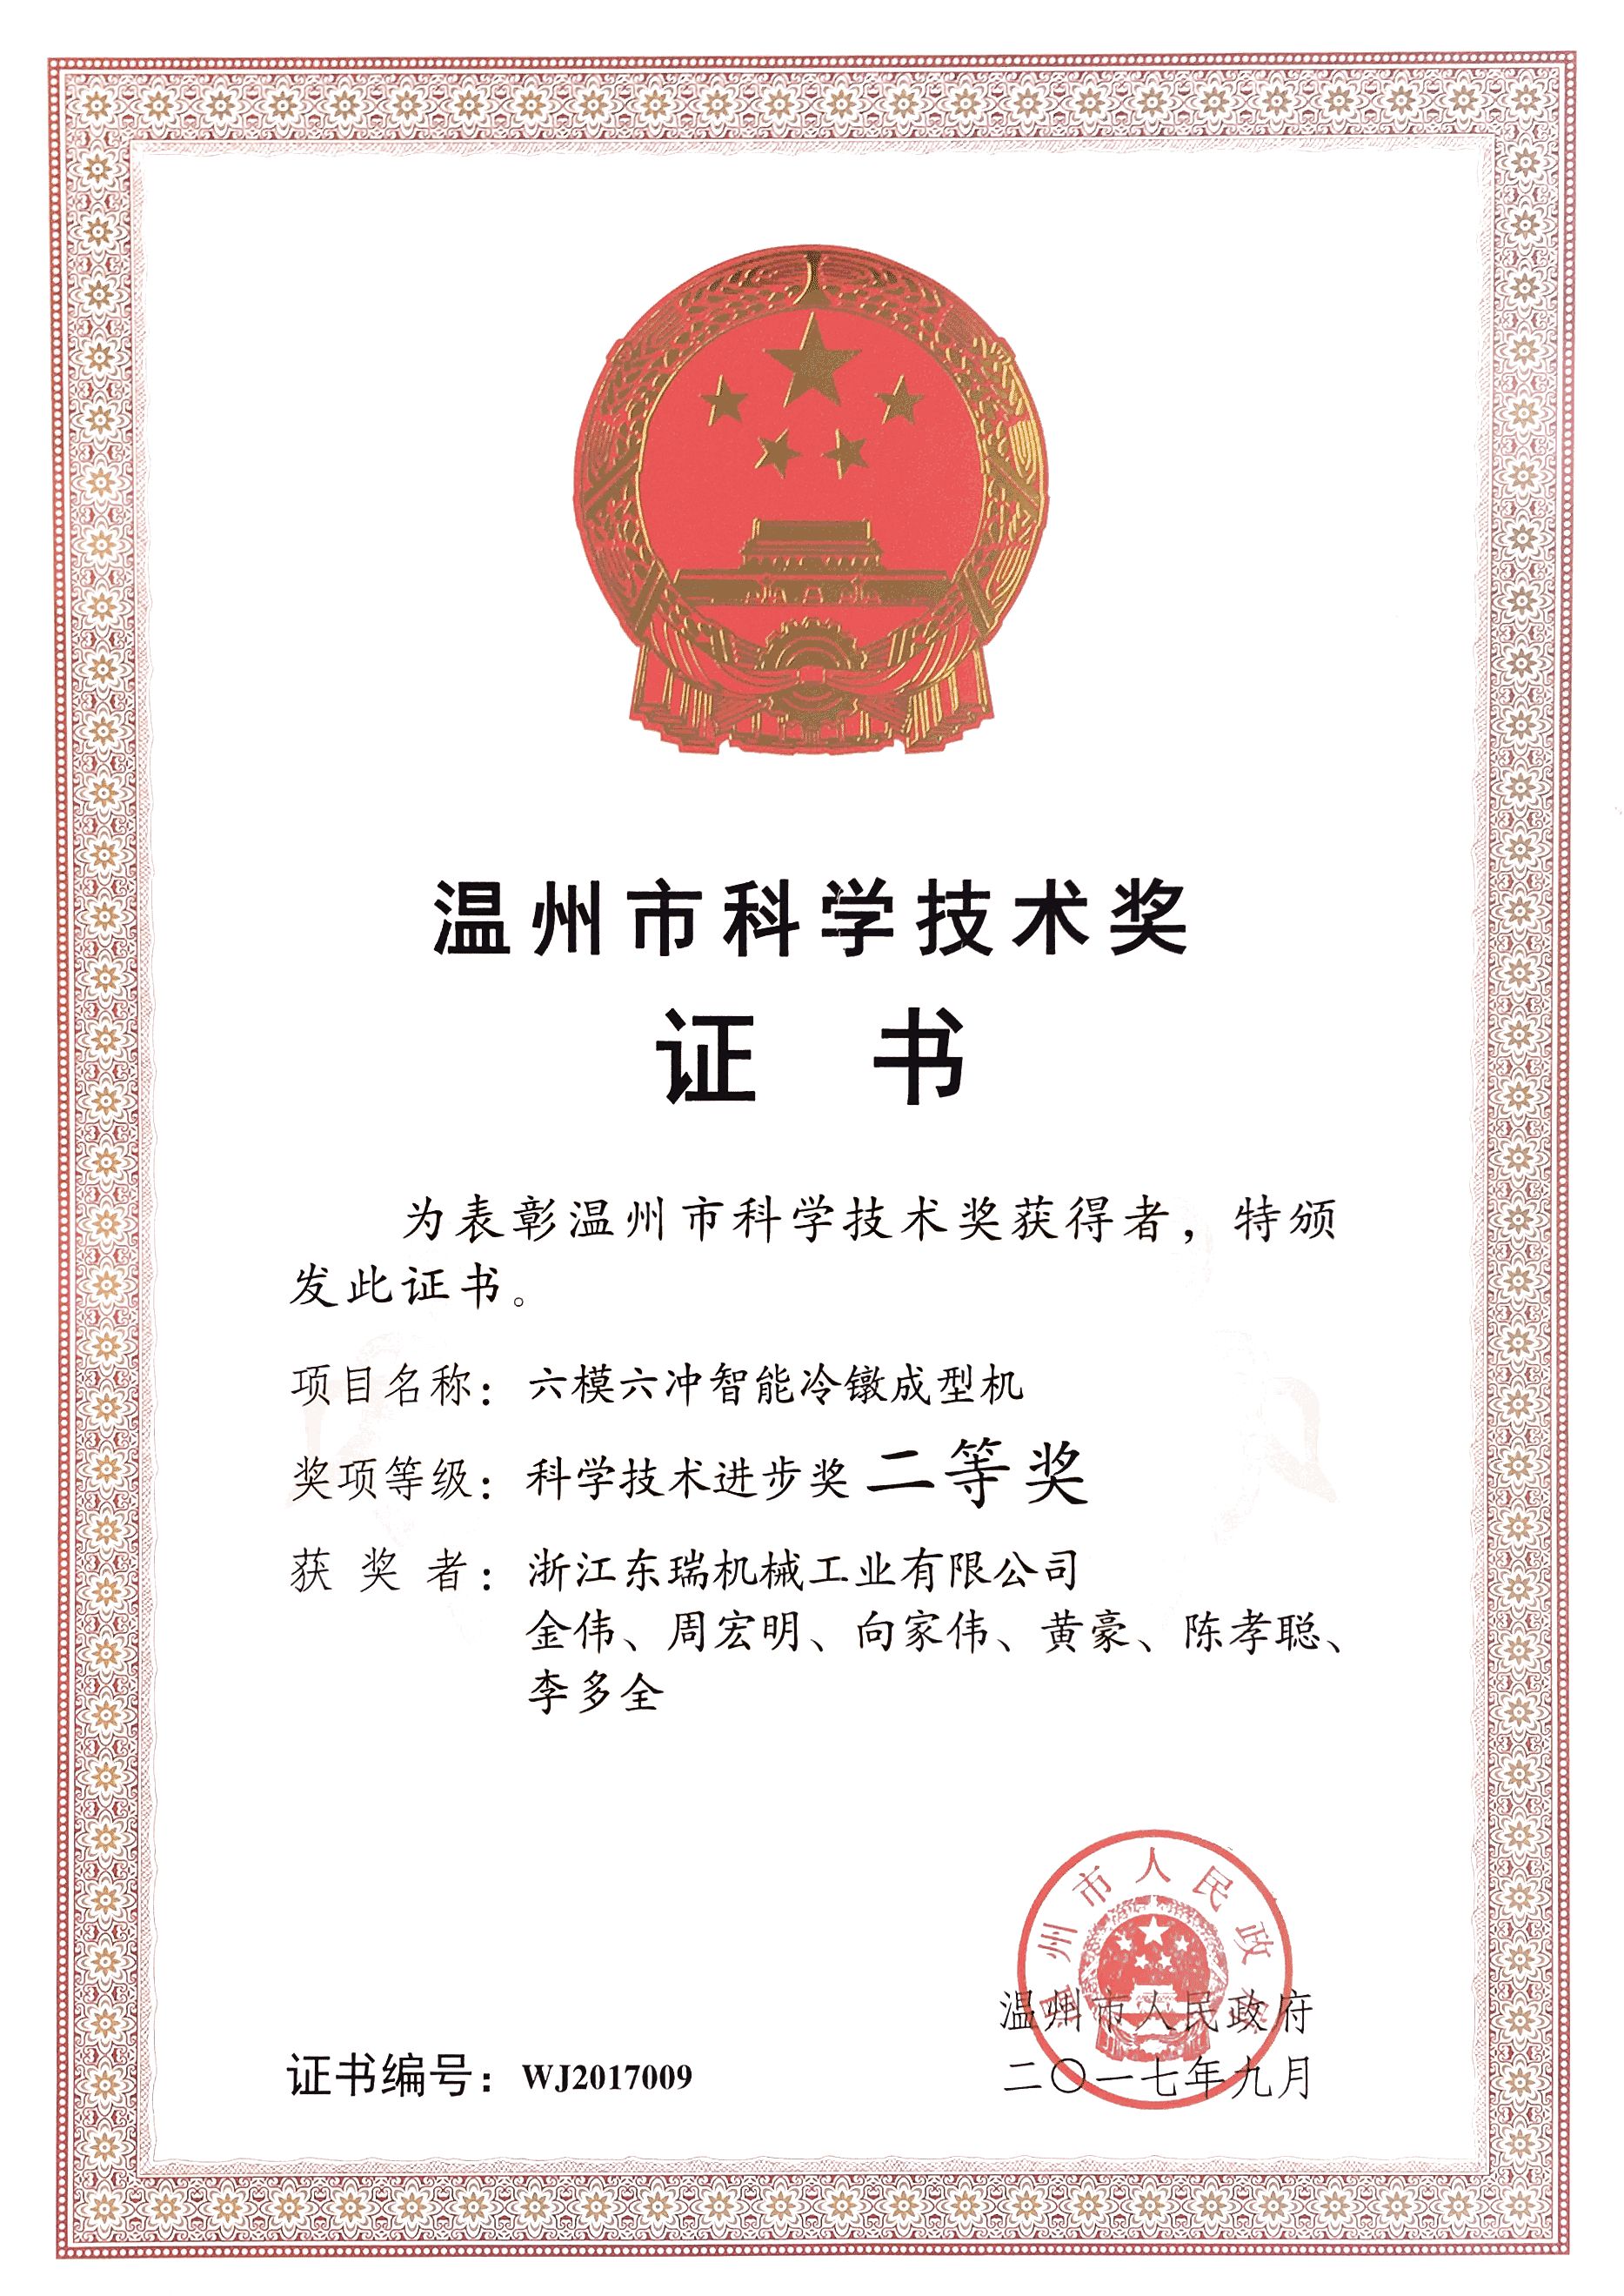 Second Prize of Wenzhou Science and Technology Progress